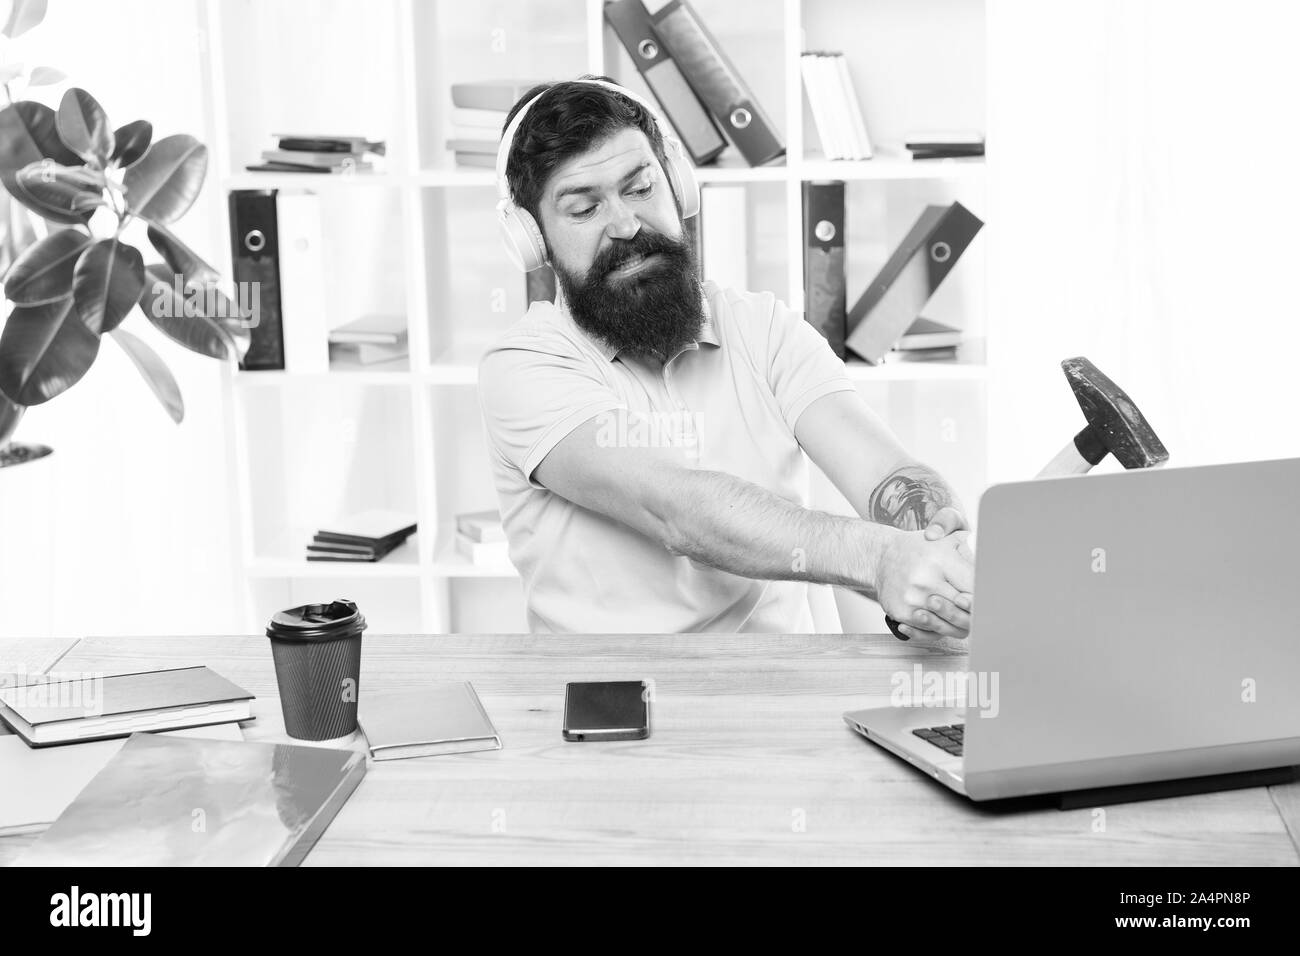 Computer lag. Reasons for computer lagging. How fix slow lagging system. Hate office routine. Man bearded guy headphones office swing hammer on computer. Slow internet connection. Outdated software. Stock Photo